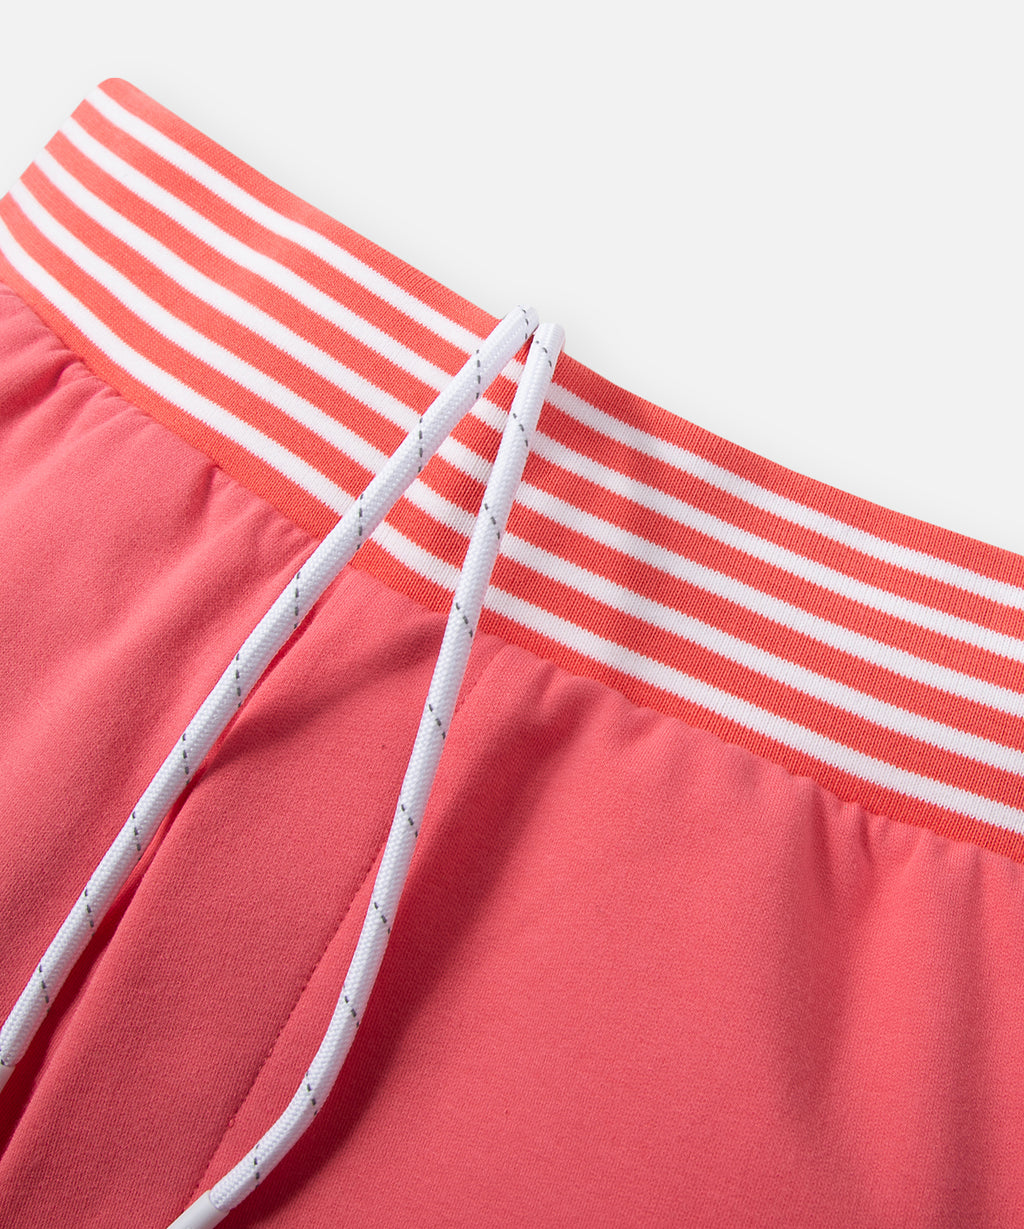  Striped rib waistband with drawcord on Paper Planes Gusset Short color Sunkissed.